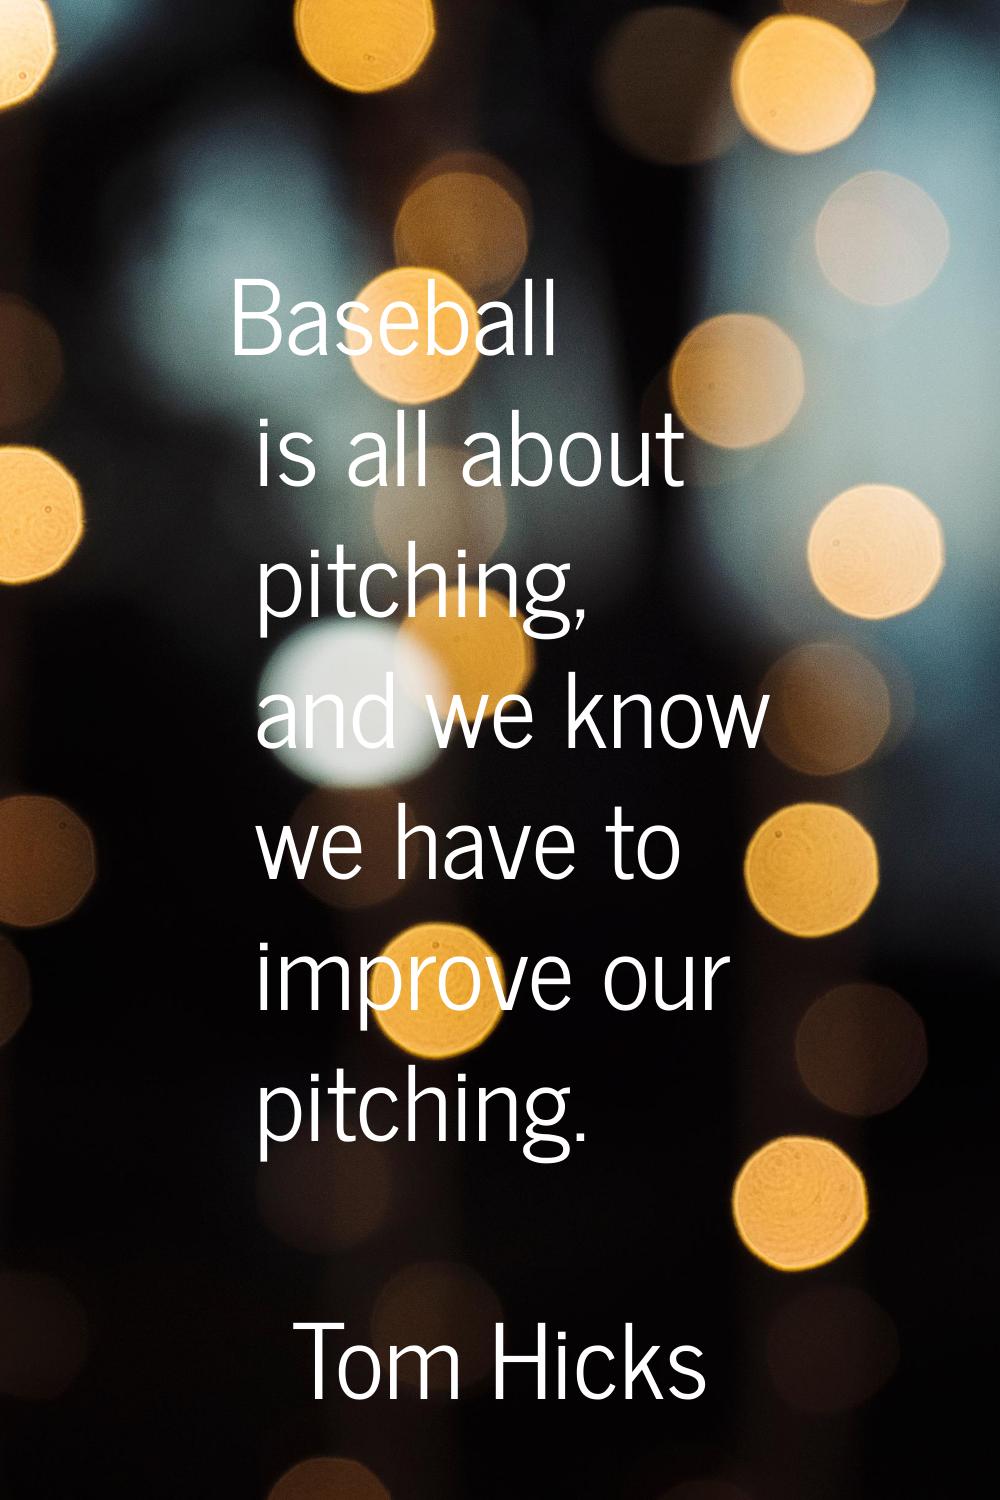 Baseball is all about pitching, and we know we have to improve our pitching.